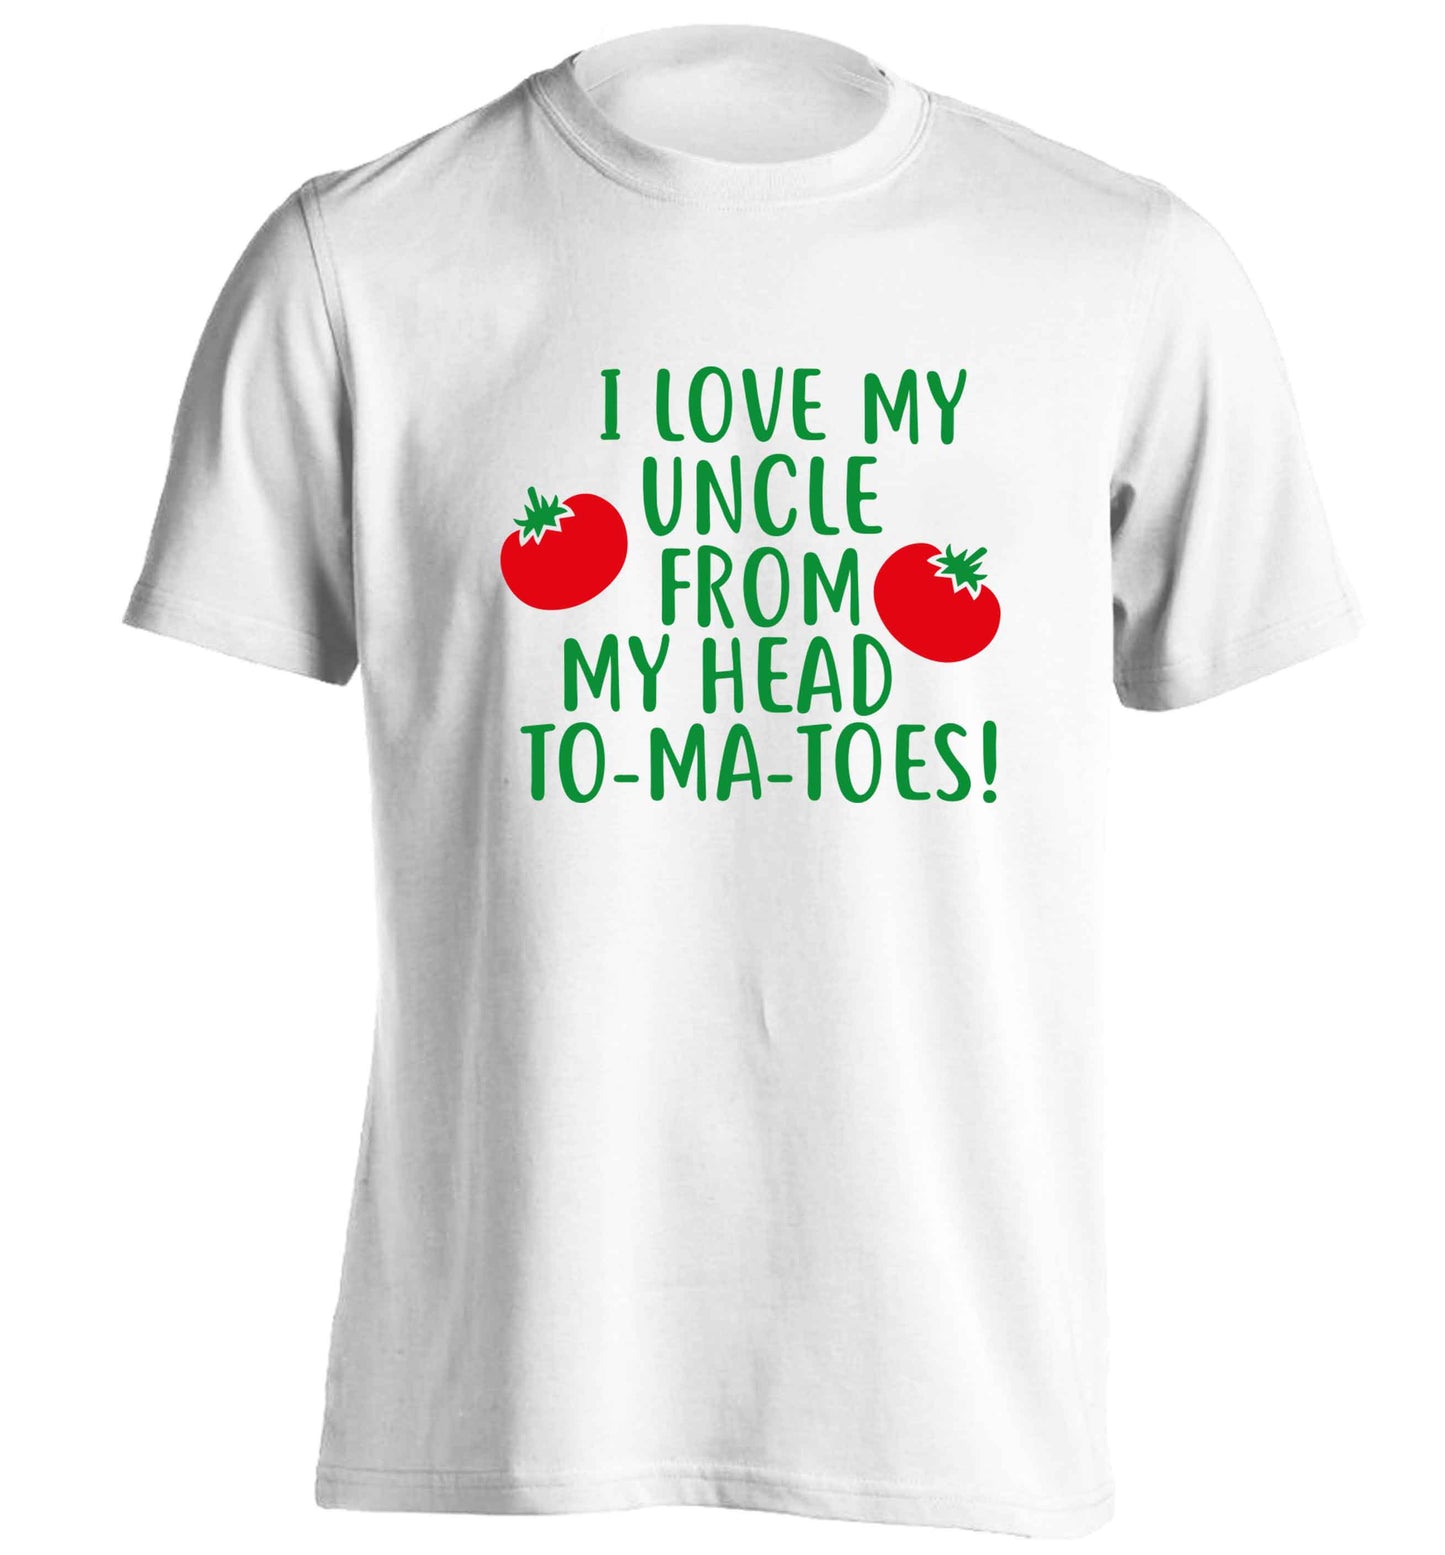 I love my uncle from my head To-Ma-Toes adults unisex white Tshirt 2XL